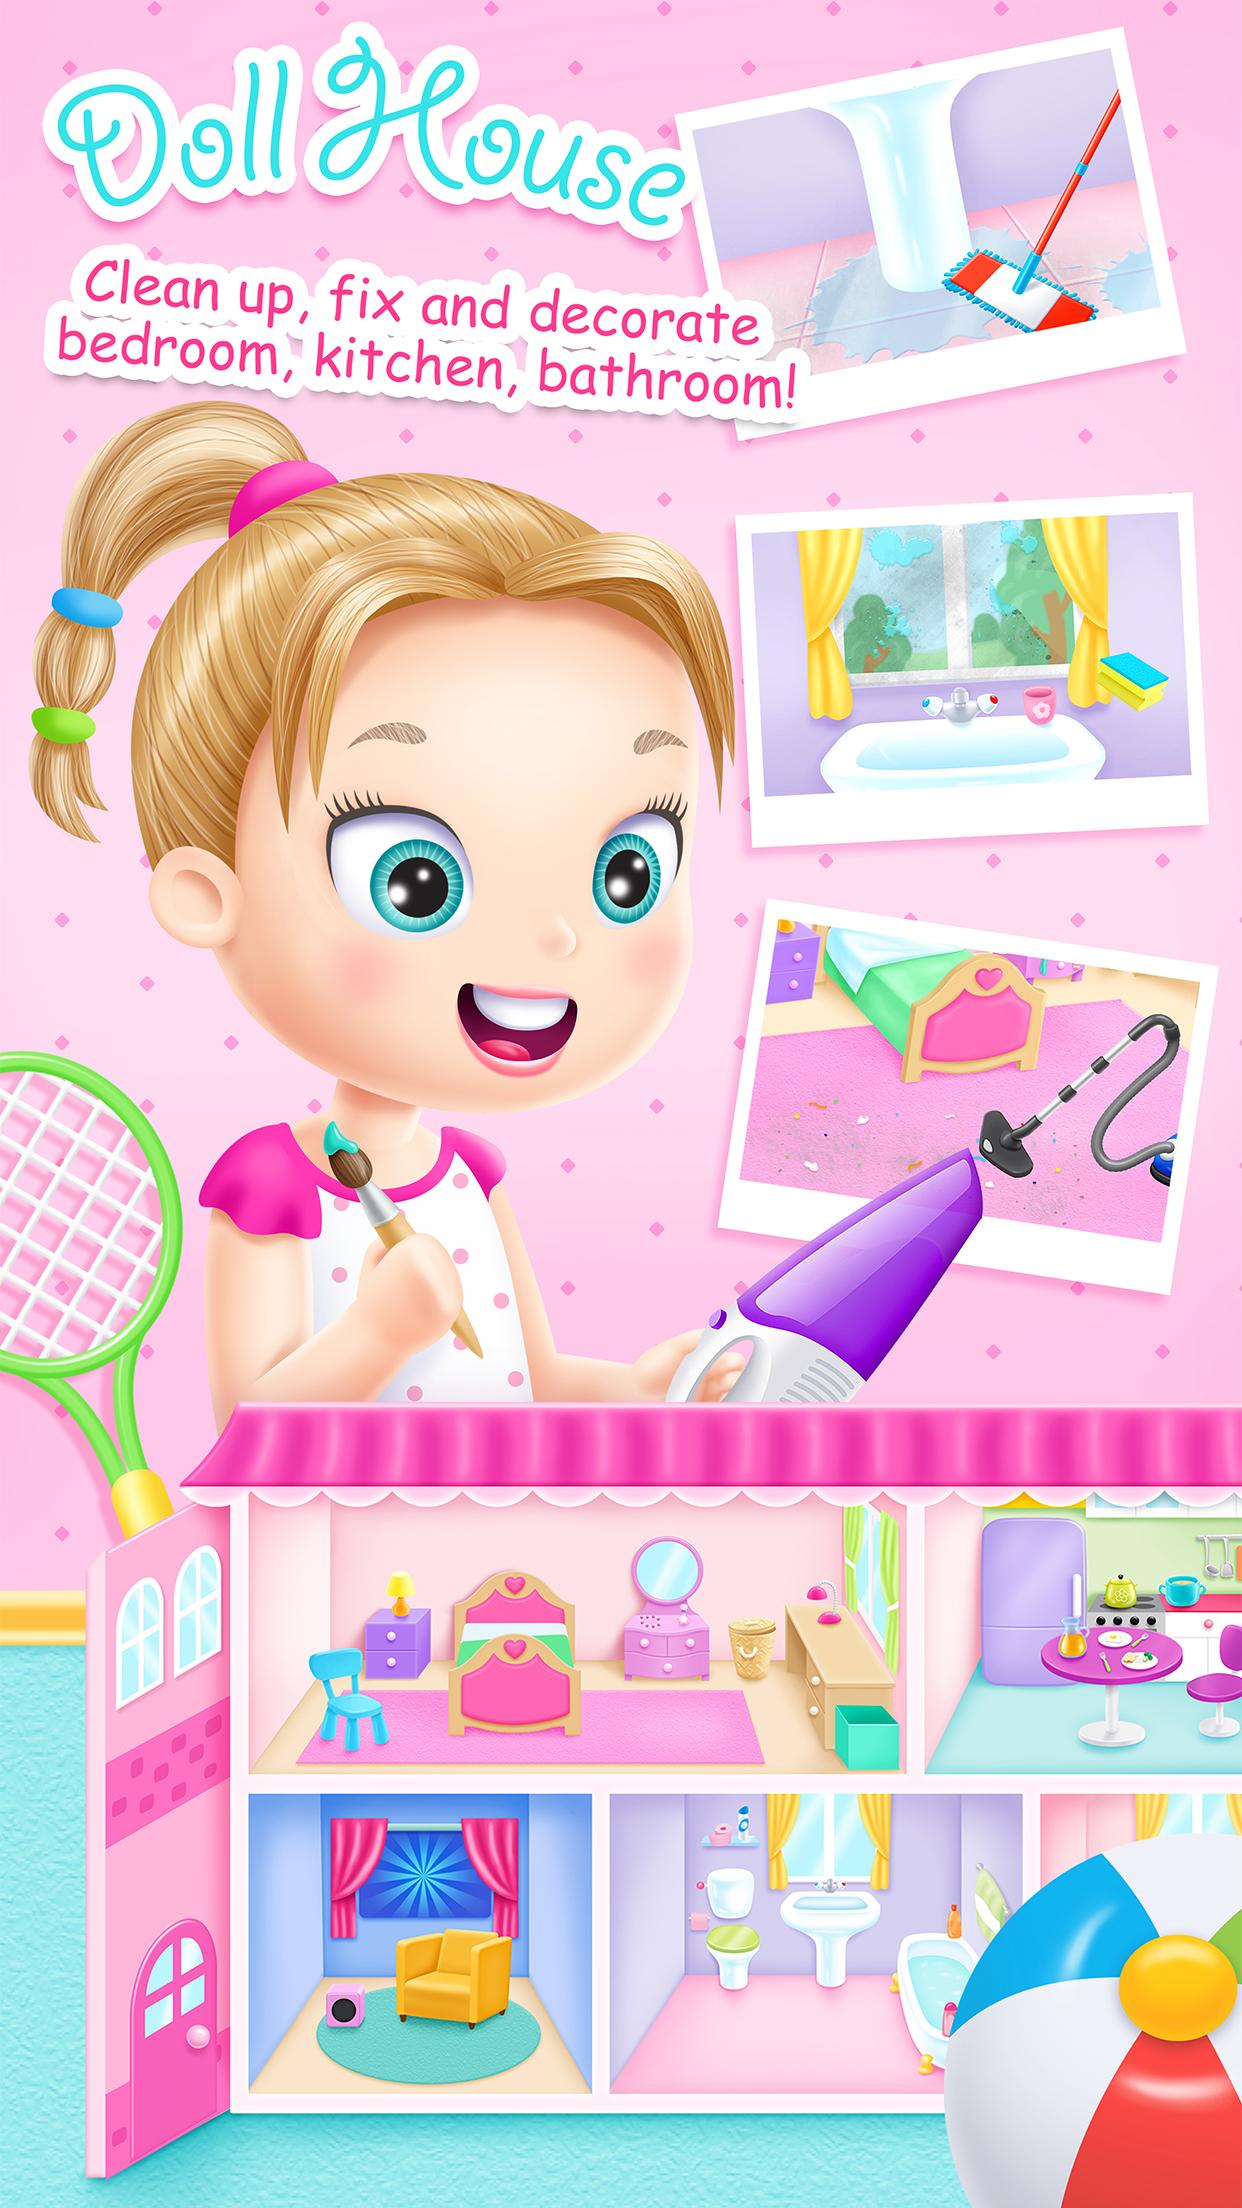 Android application Doll House Cleanup screenshort